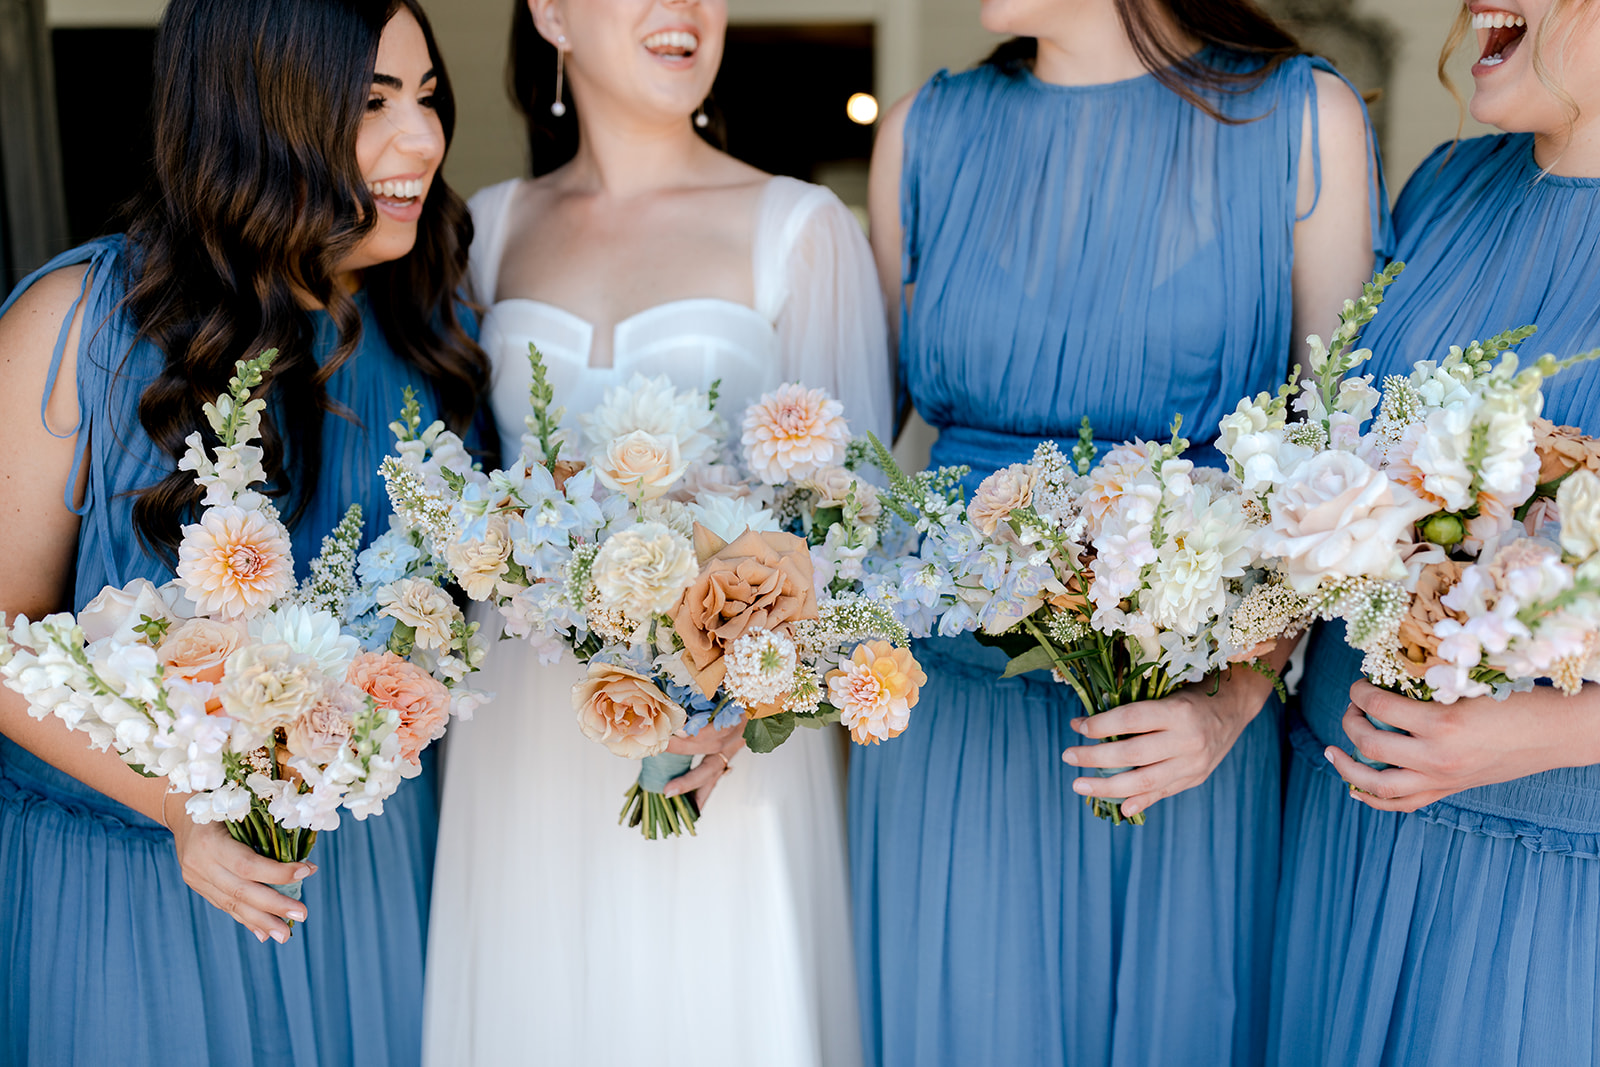 Close-up of bride with her bridesmaids holding their bridal bouquets before her elegant country wedding.